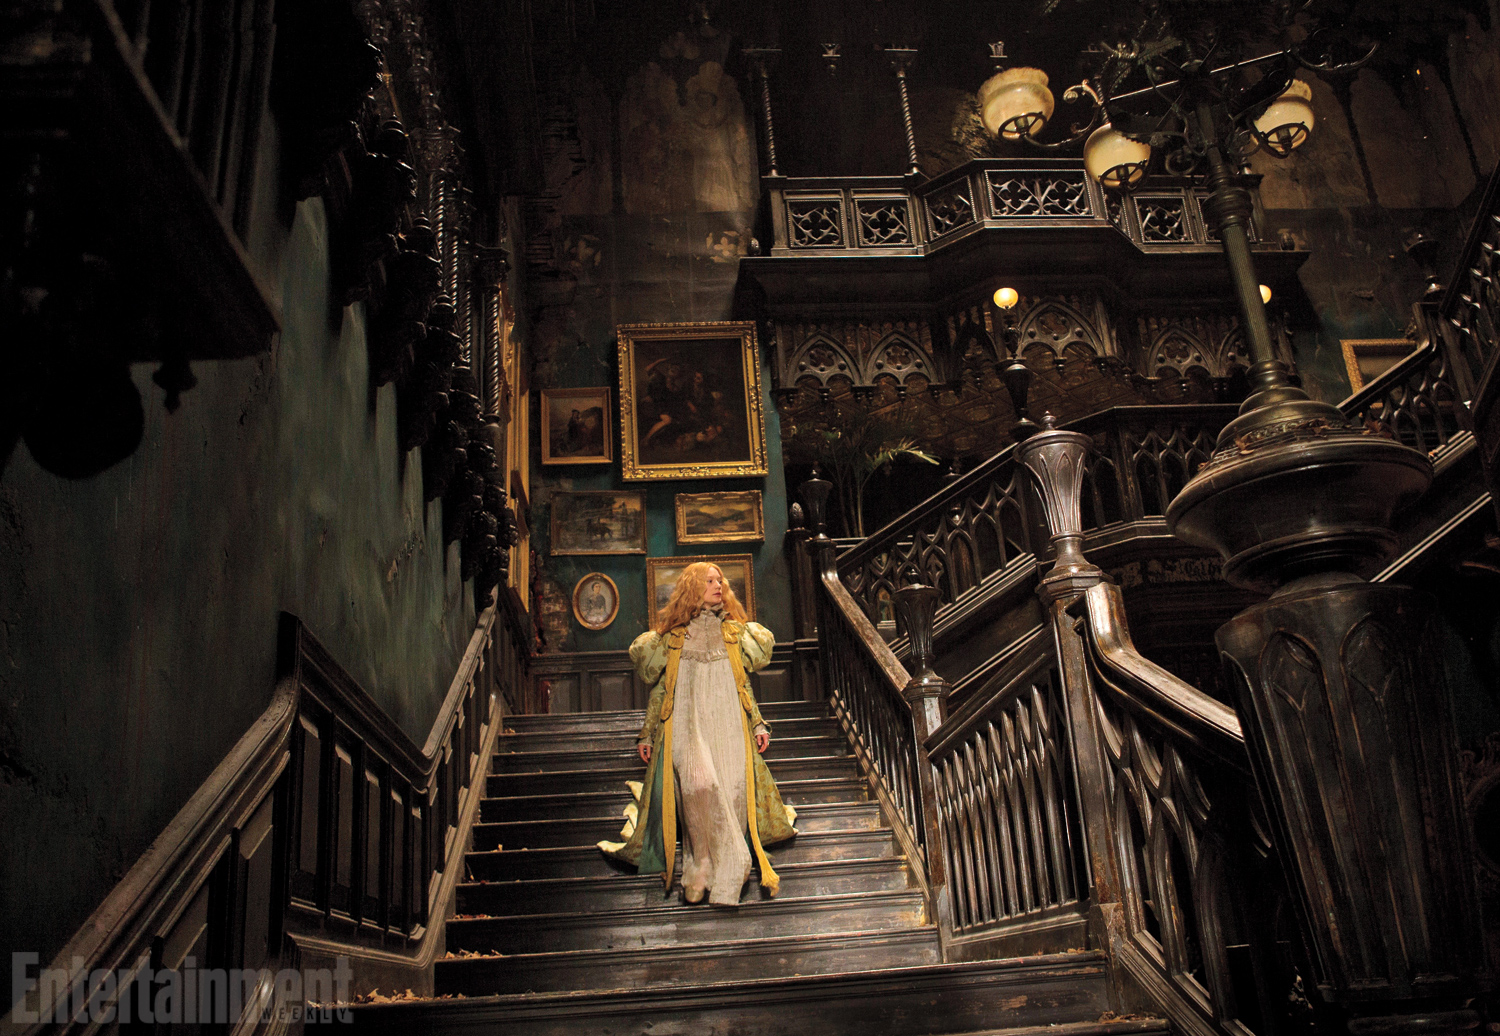 Crimson Peak (2015) Pictures, Trailer, Reviews, News, DVD and Soundtrack